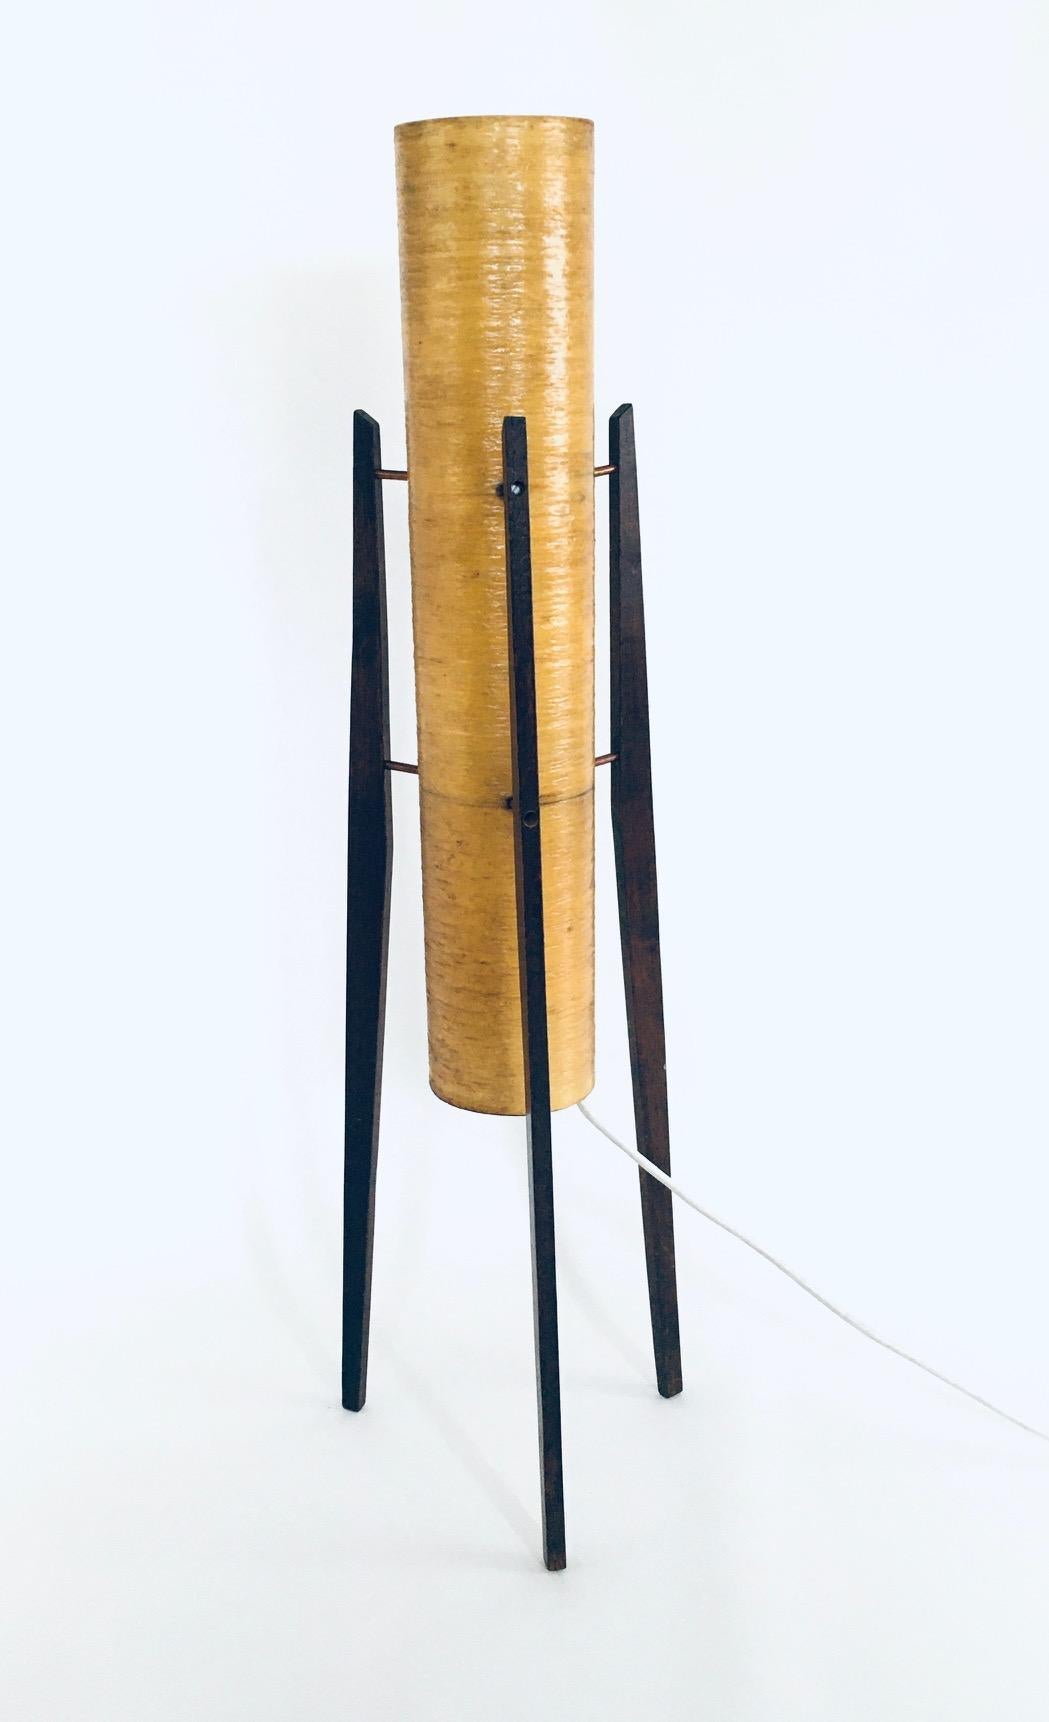 Vintage midcentury Space Age Design ROCKET floor lamp by Novoplast. Made in Czechoslovakia, 1950's / 60's. Yellow fiber plastic shade with wooden tripod legs. Original condition with new wire and plug. Normal wear to the fiberplastic where the shade